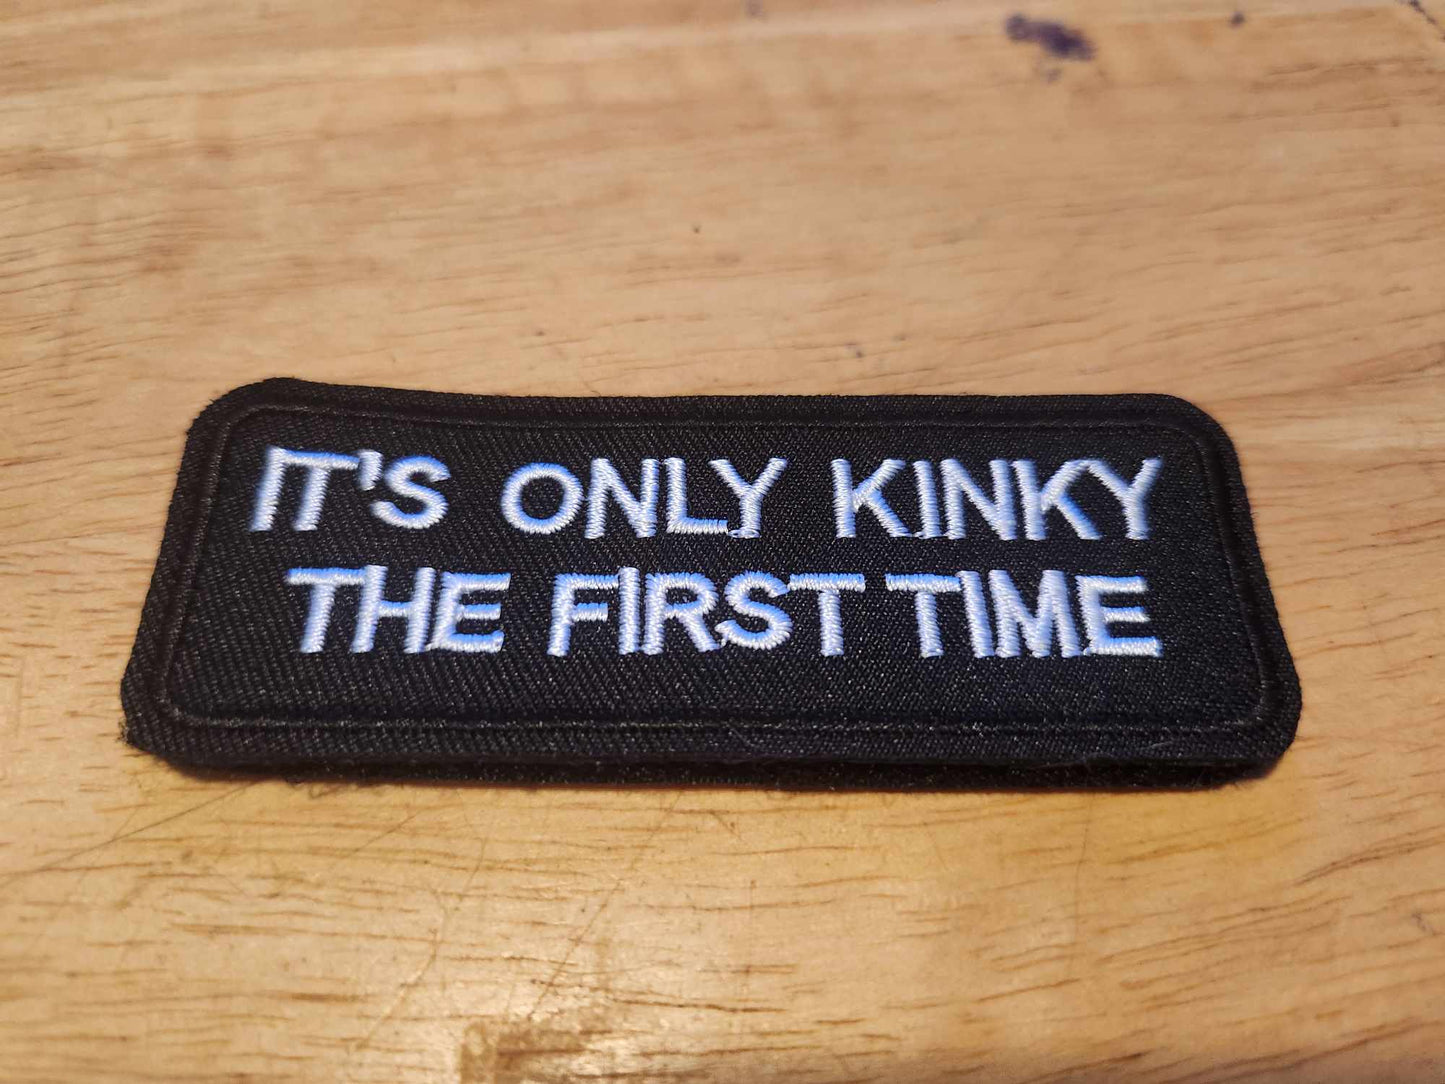 Kinky the first time